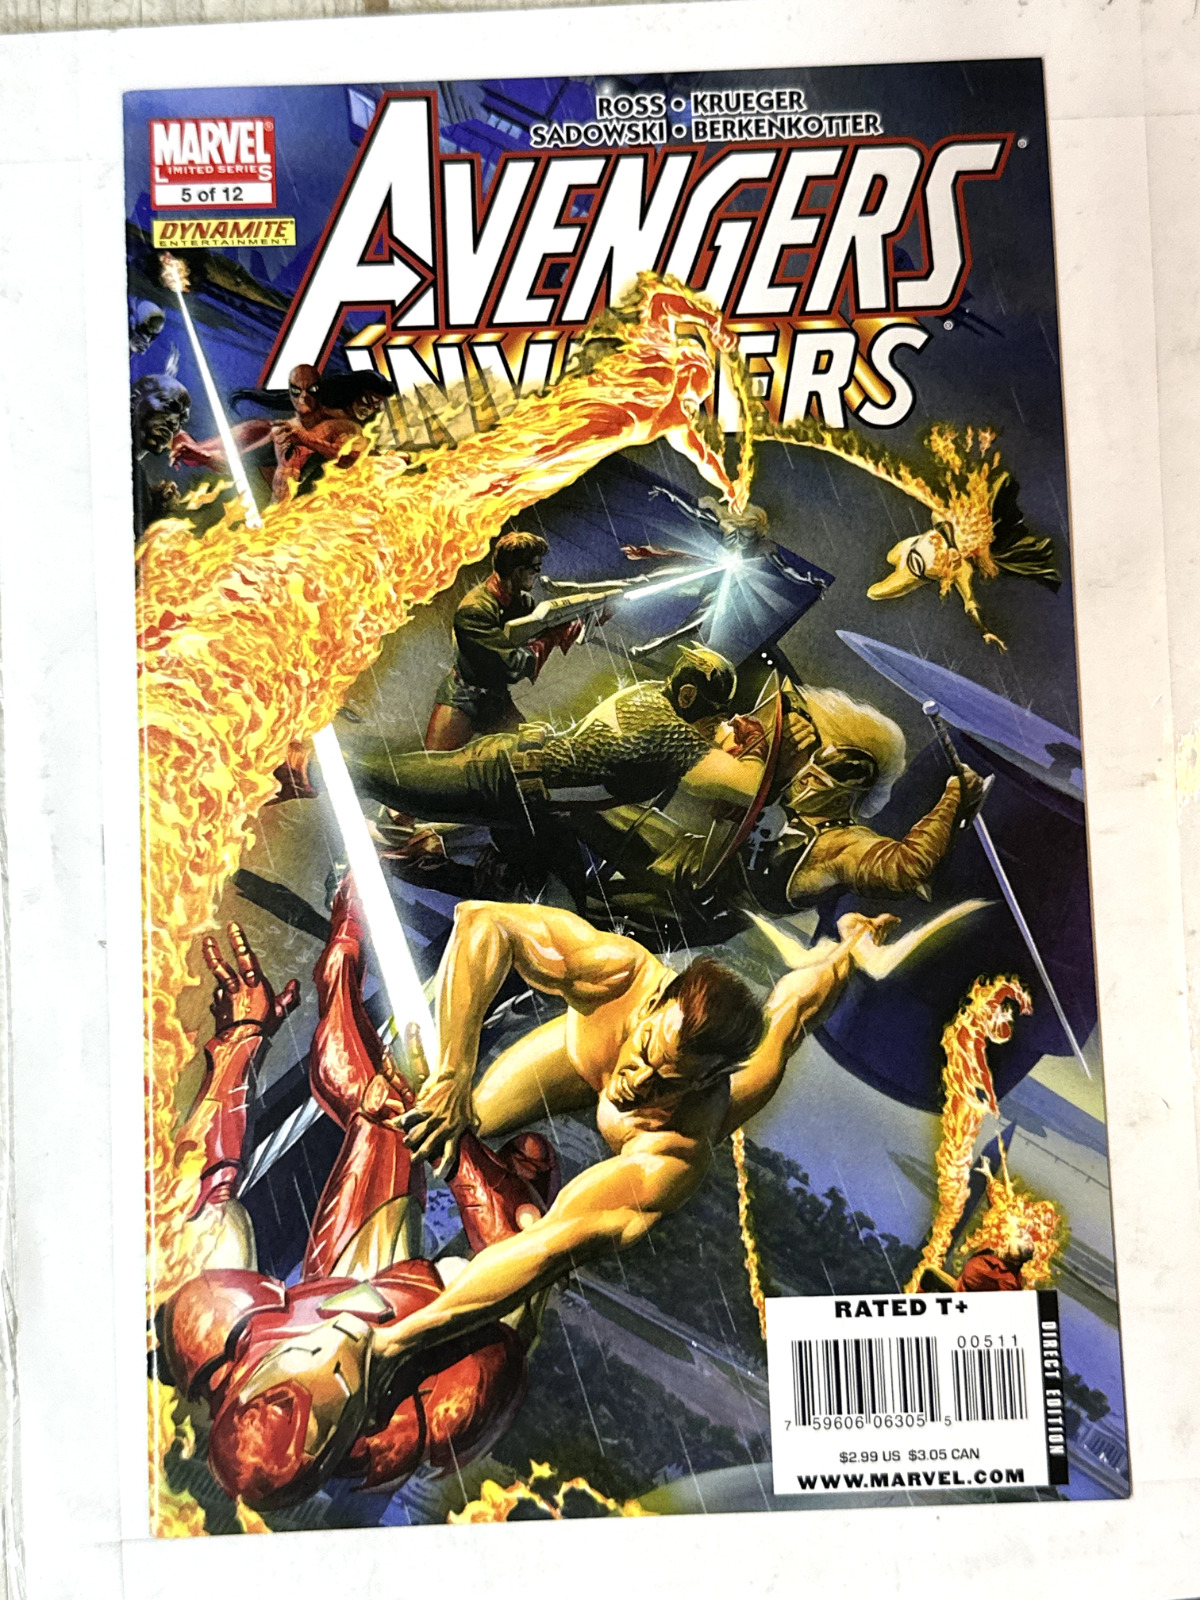 Avengers Invaders Comic Book Issue #5 of 12 Marvel Comics 2008 | Combined Shippi